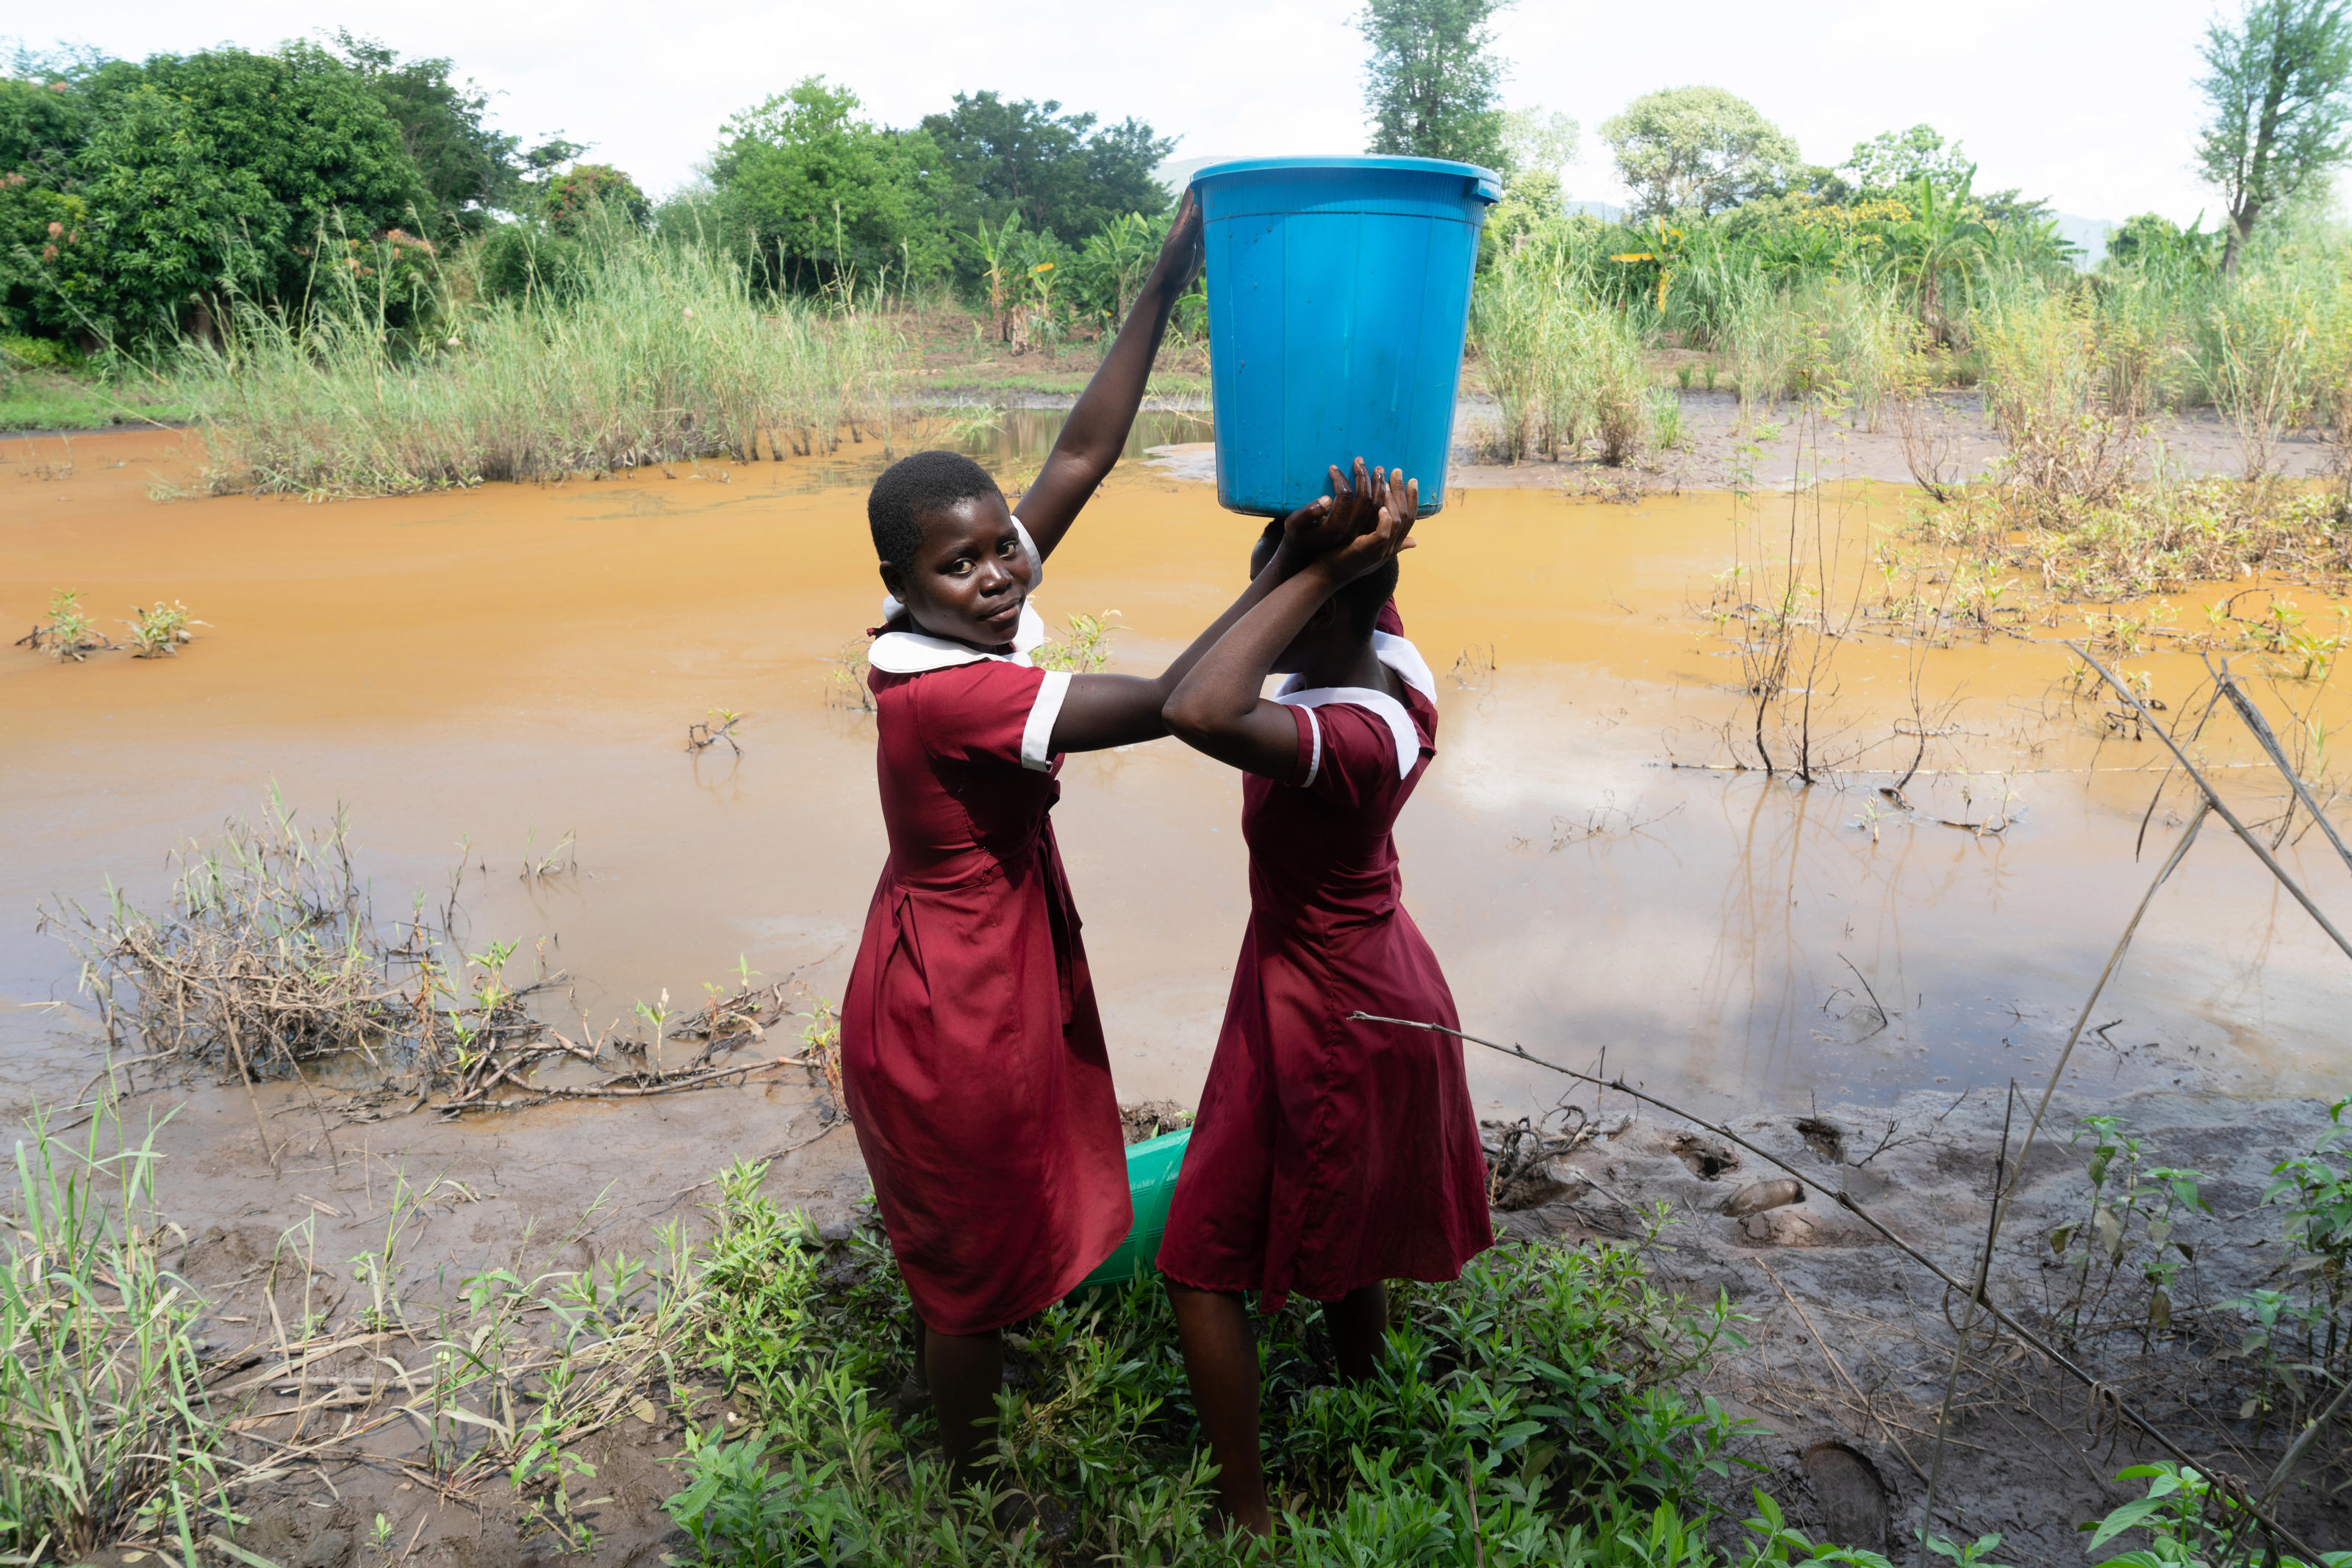 Grace, 16, student, and her friend Ivy, 15, collecting water from a stream, Malawi, April 2022.